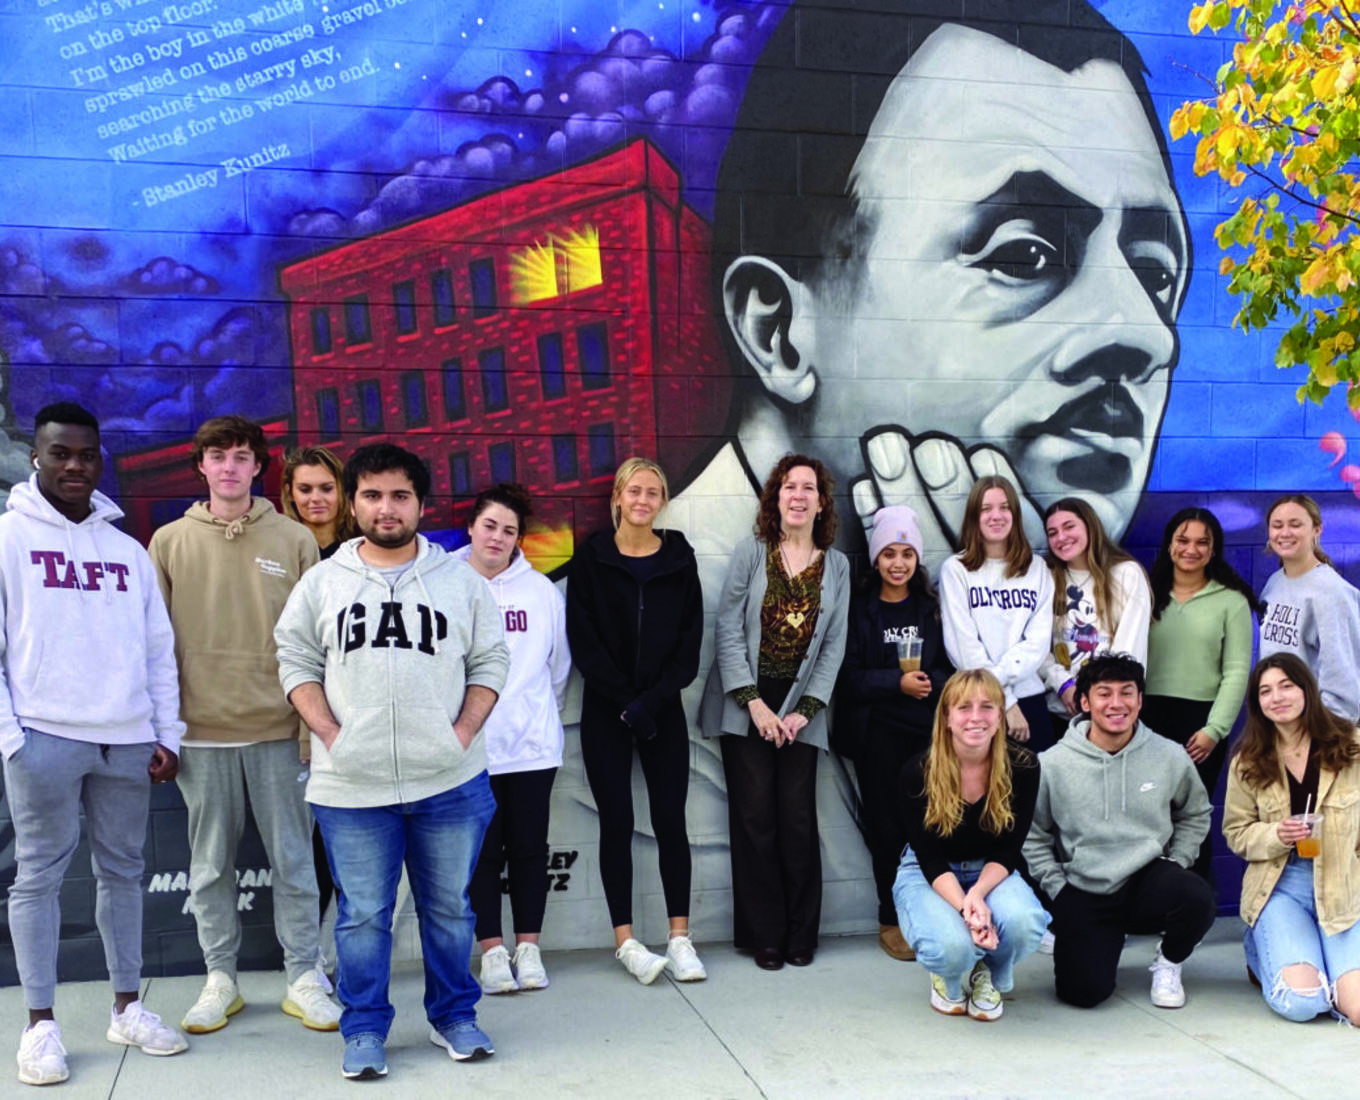 Students and professor stand in front of poet Stanley Kunitz mural in Worcester, MA.